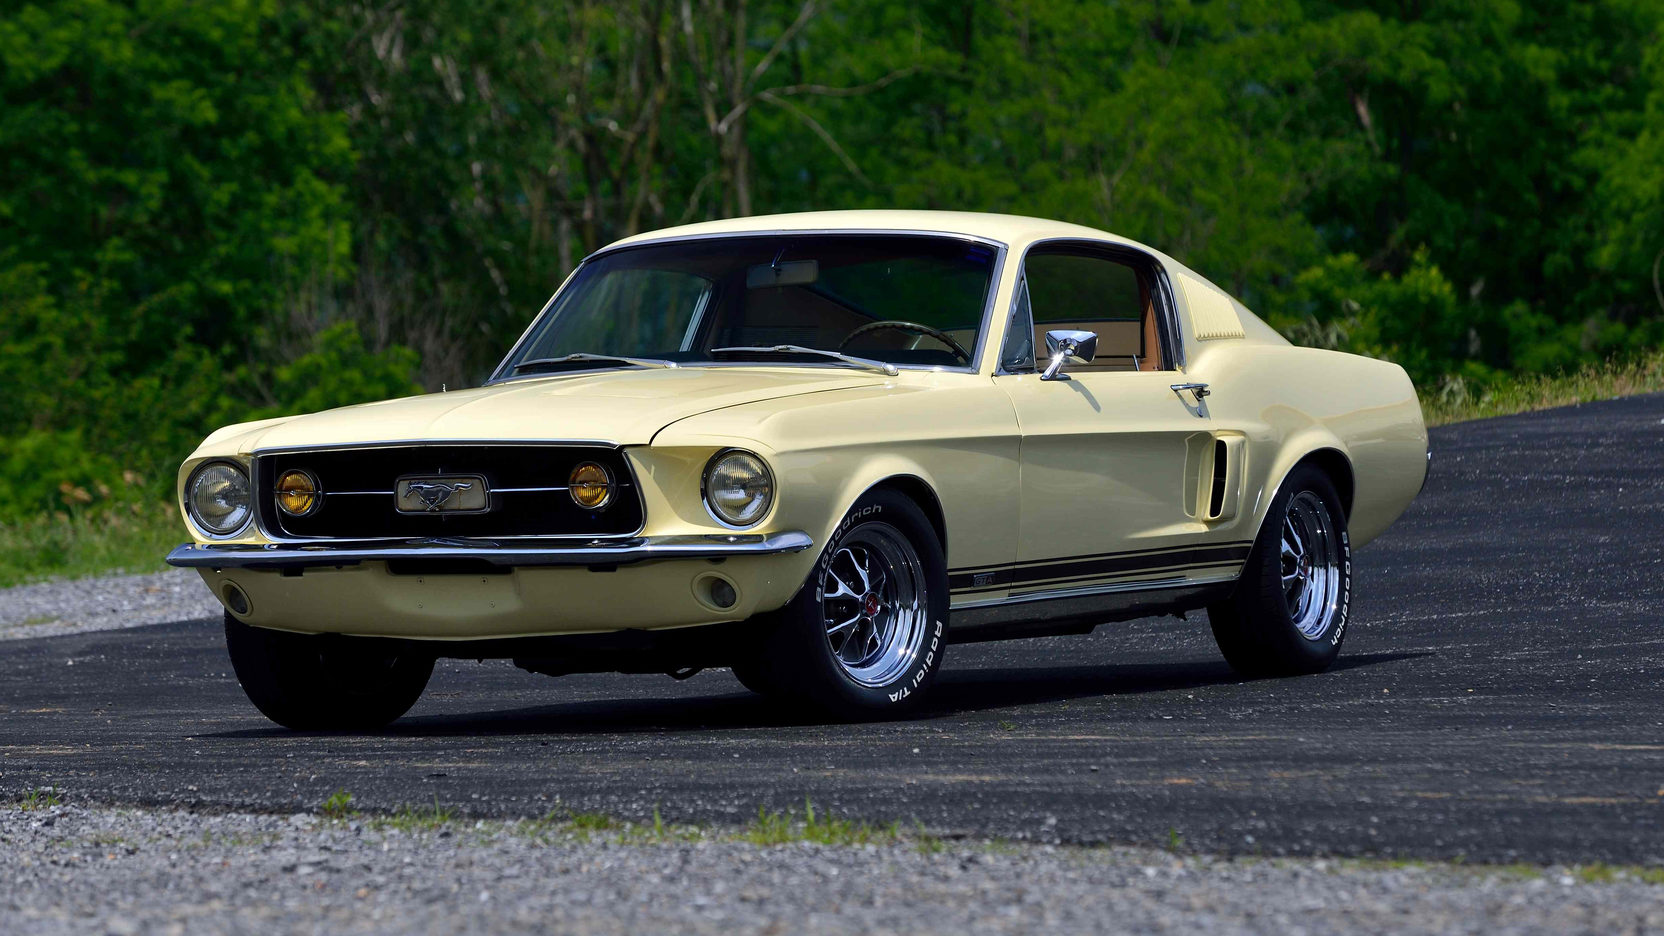 Mustang Of The Day: 1967 Ford Mustang GTA